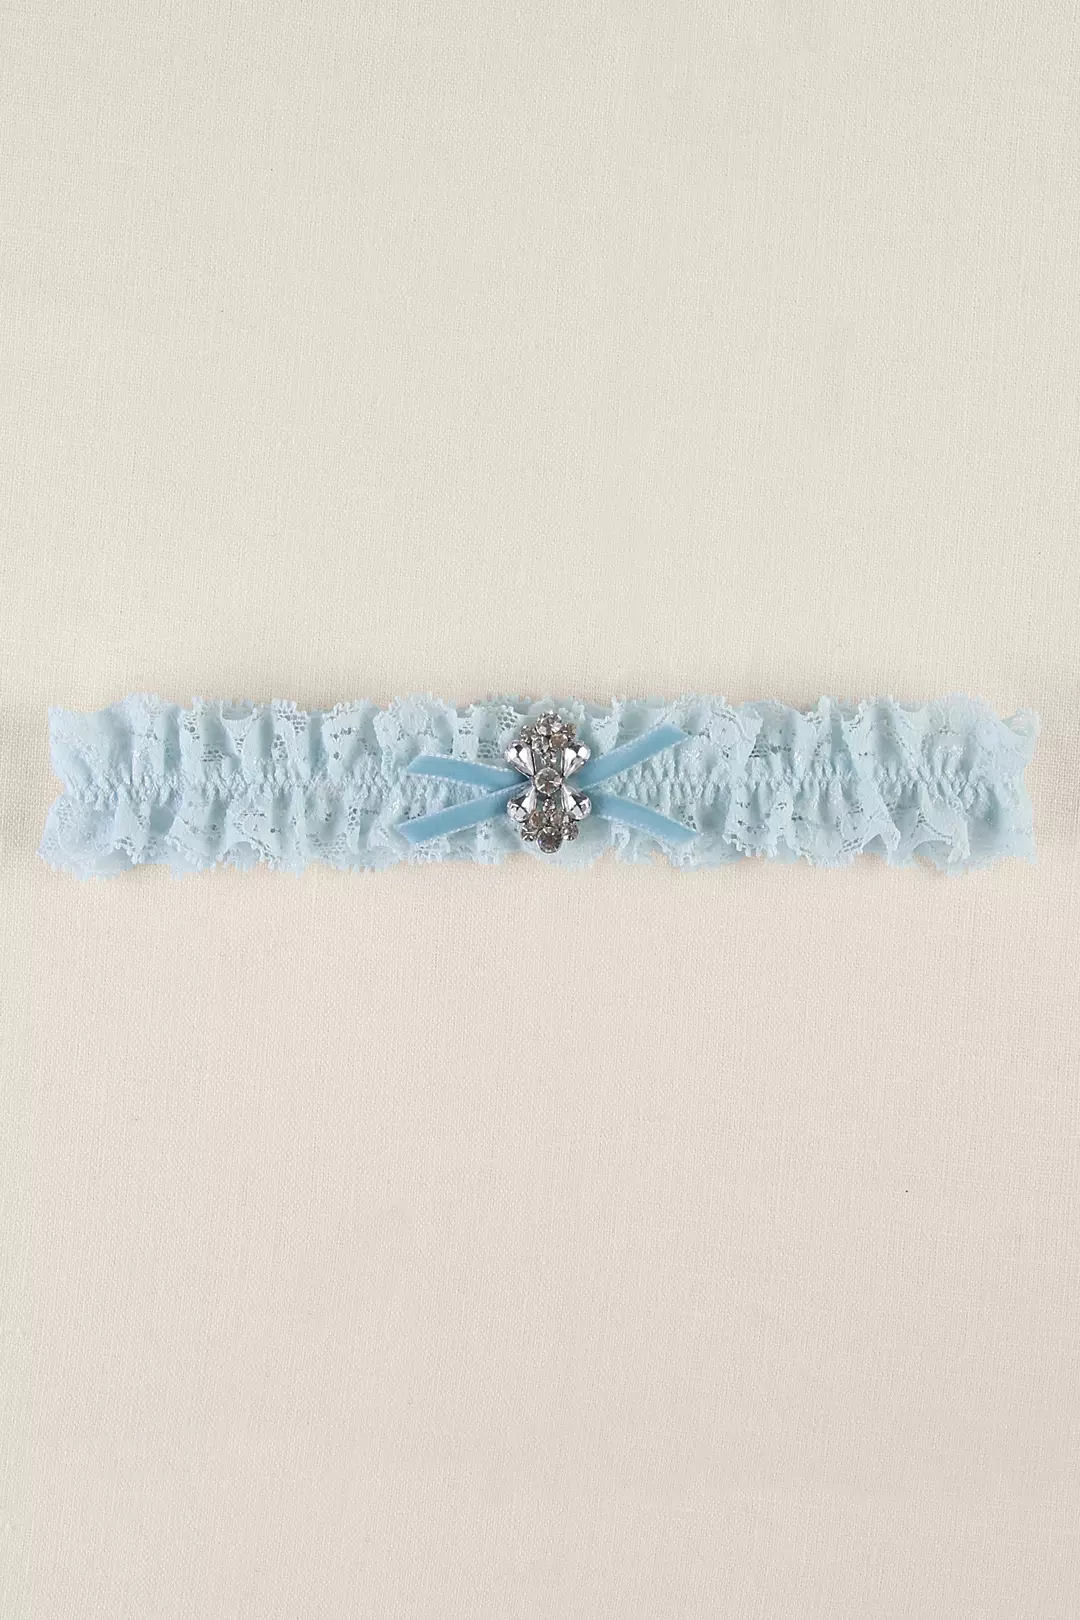 Blue Ruffled Lace Garter with Butterfly Brooch Image